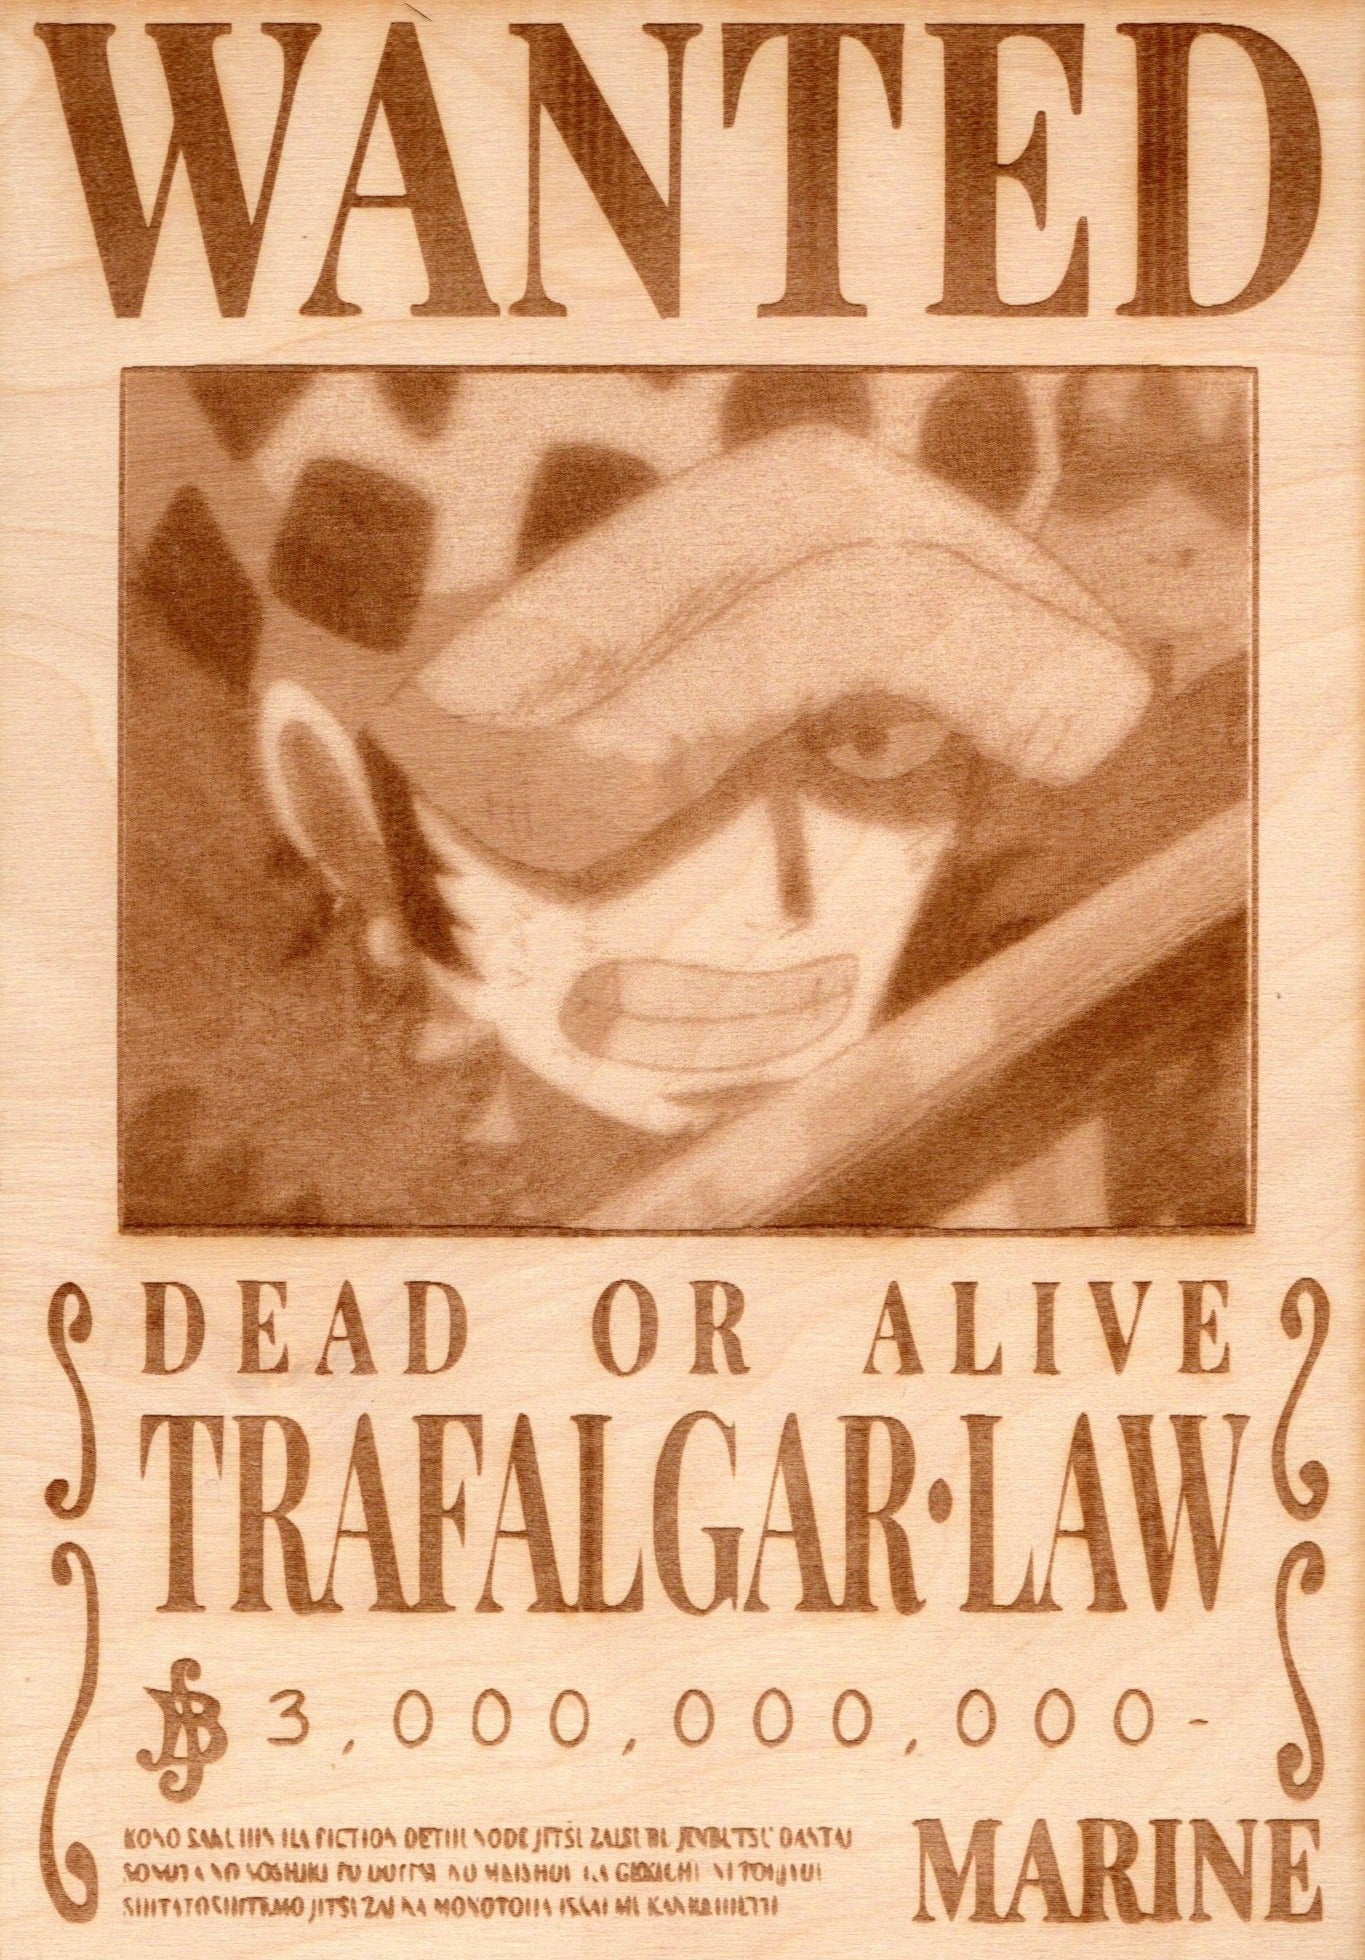 One Piece - Law Wooden Wanted Poster (Updated Bounty)